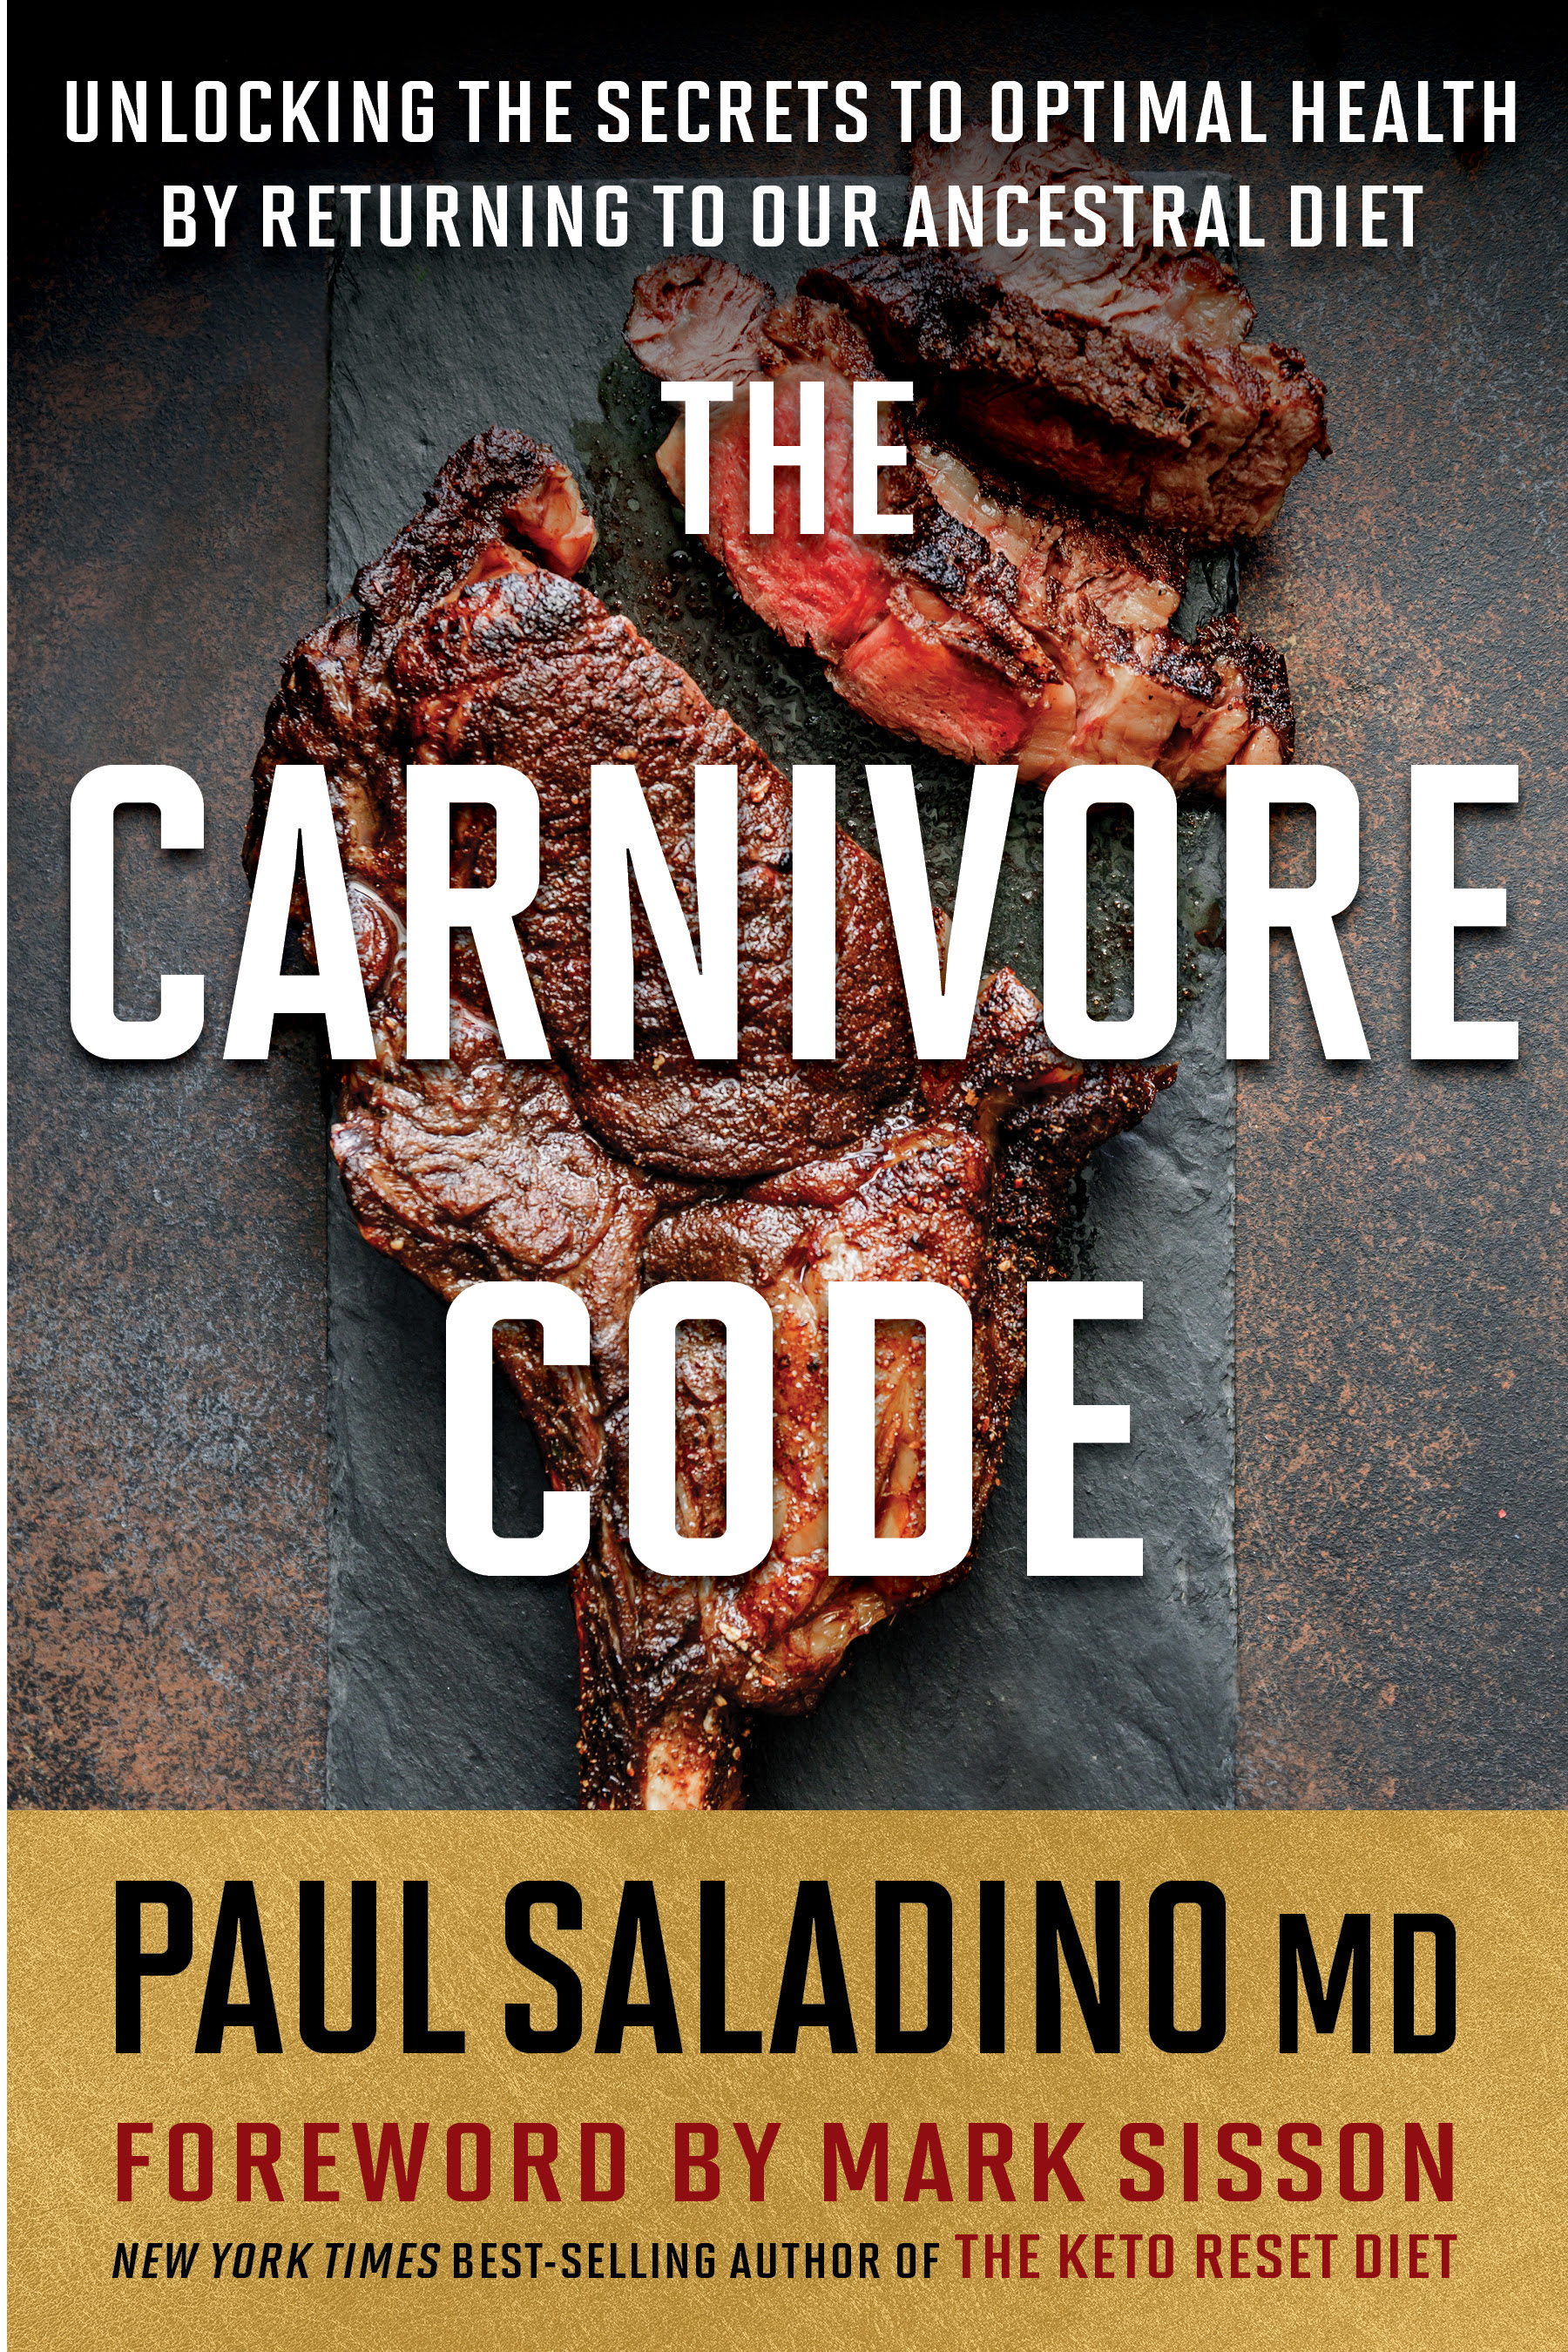 The Carnivore Code: Unlocking the Secrets to Optimal Health by Returning to Our Ancestral Diet in Kindle/PDF/EPUB